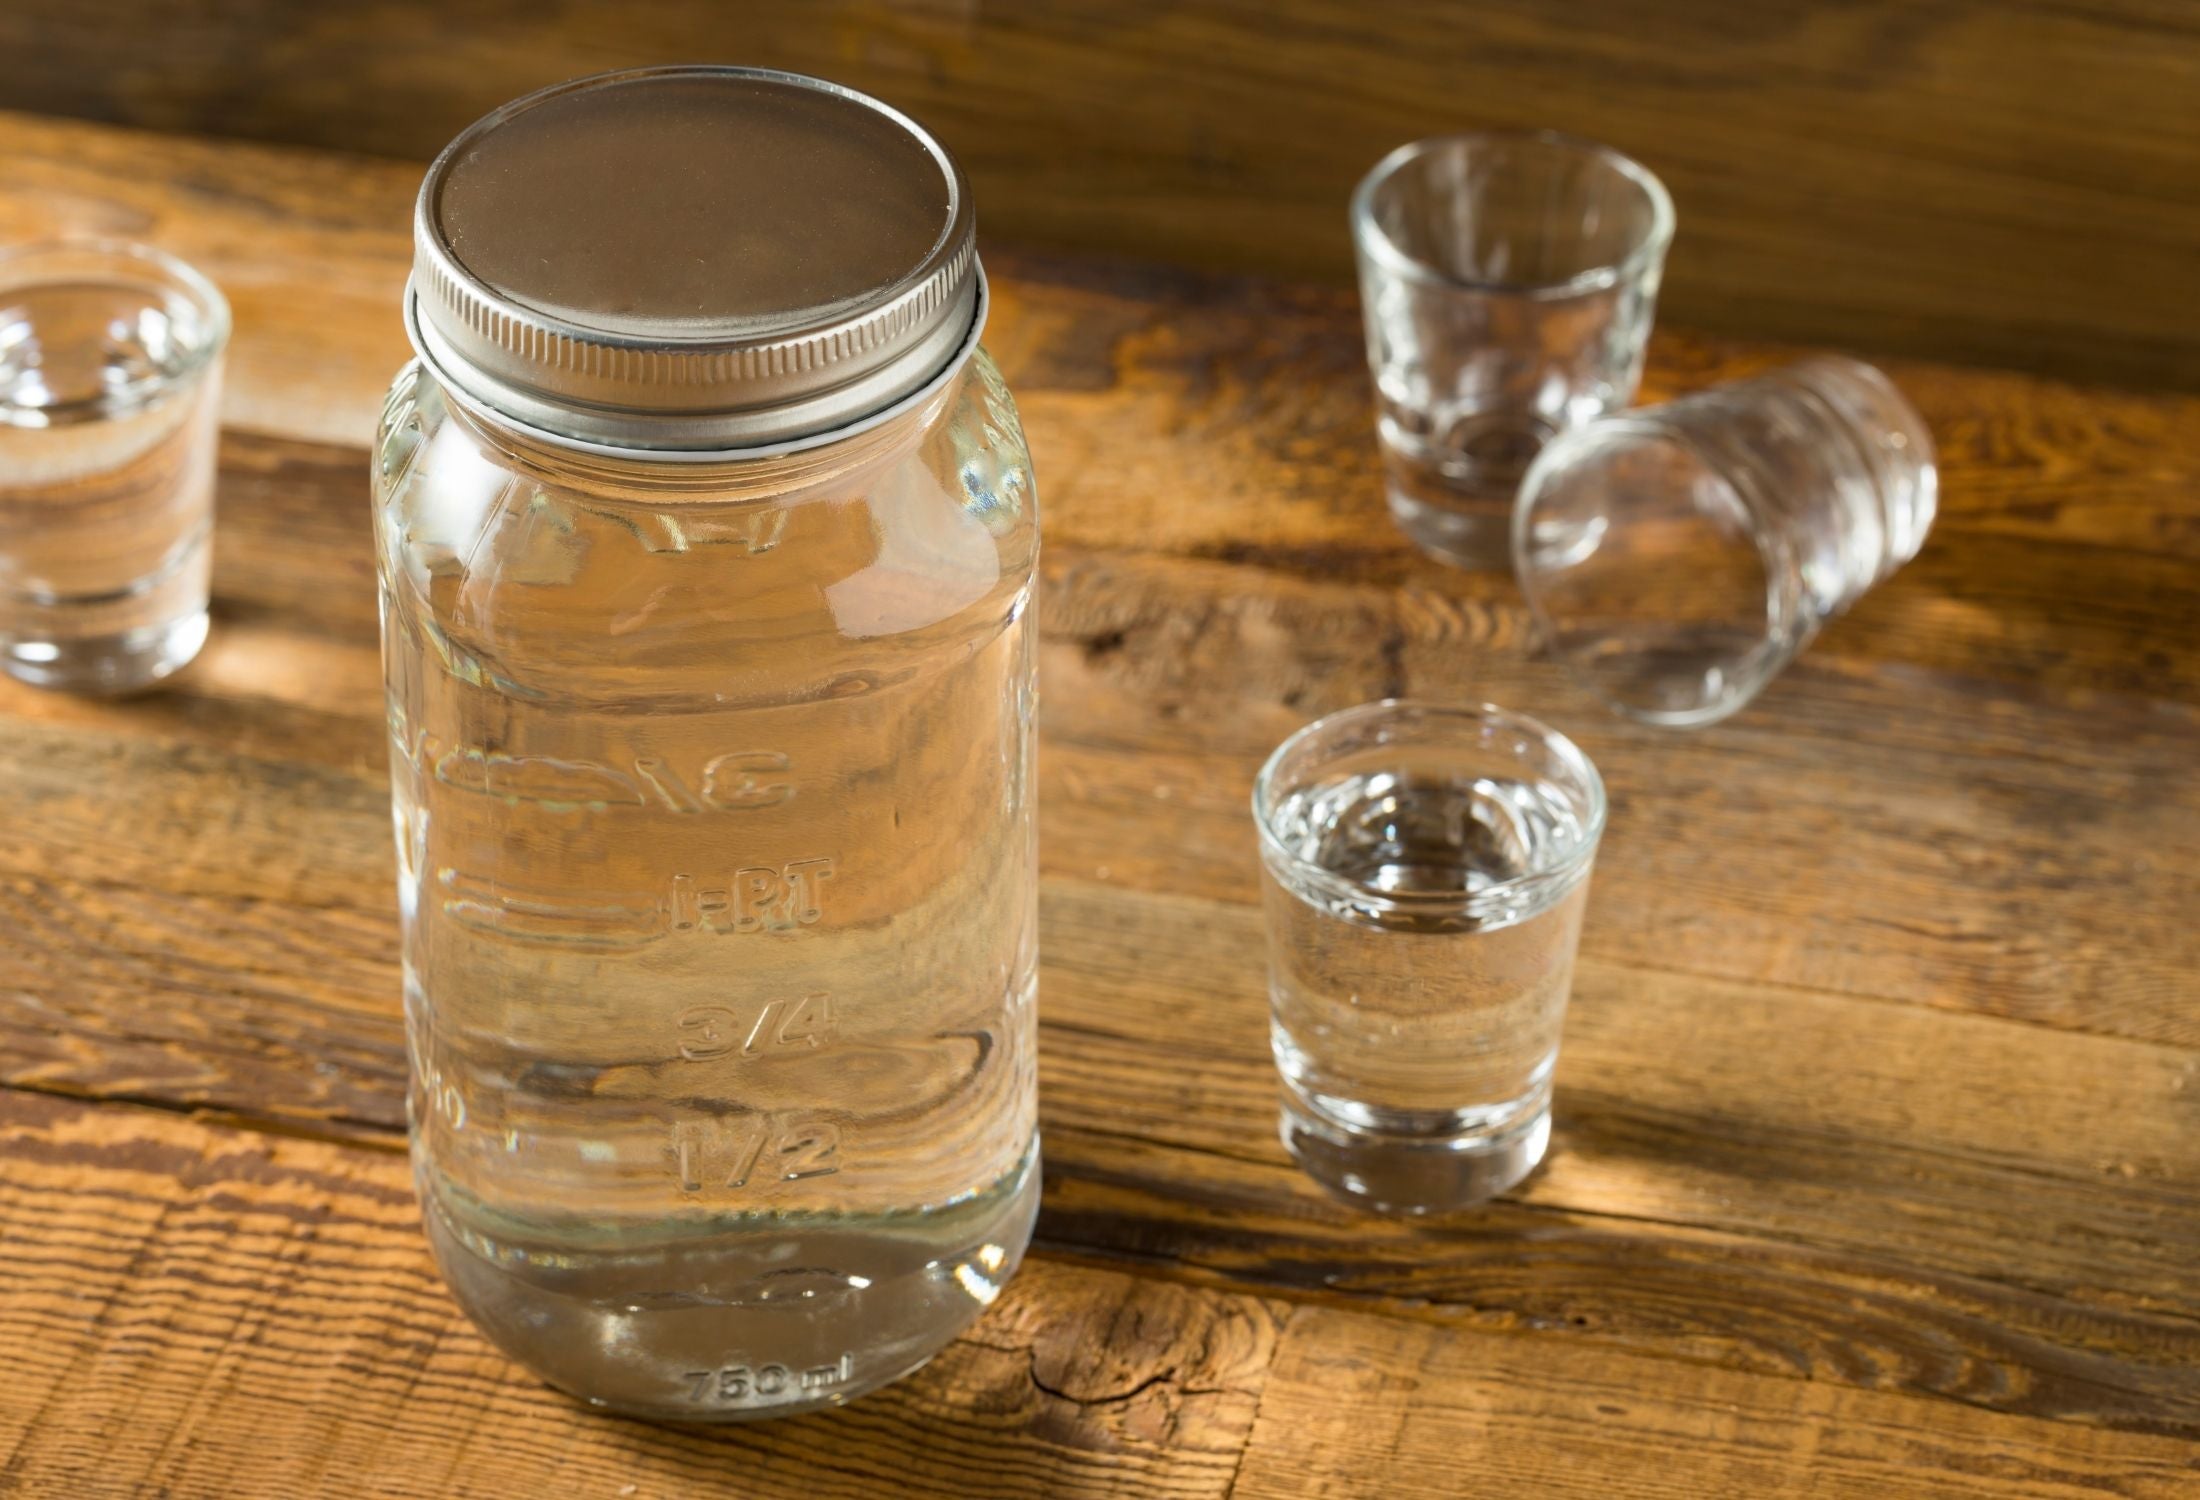 Moonshine: How To Make This Illegal Drink The Right Way – Advanced